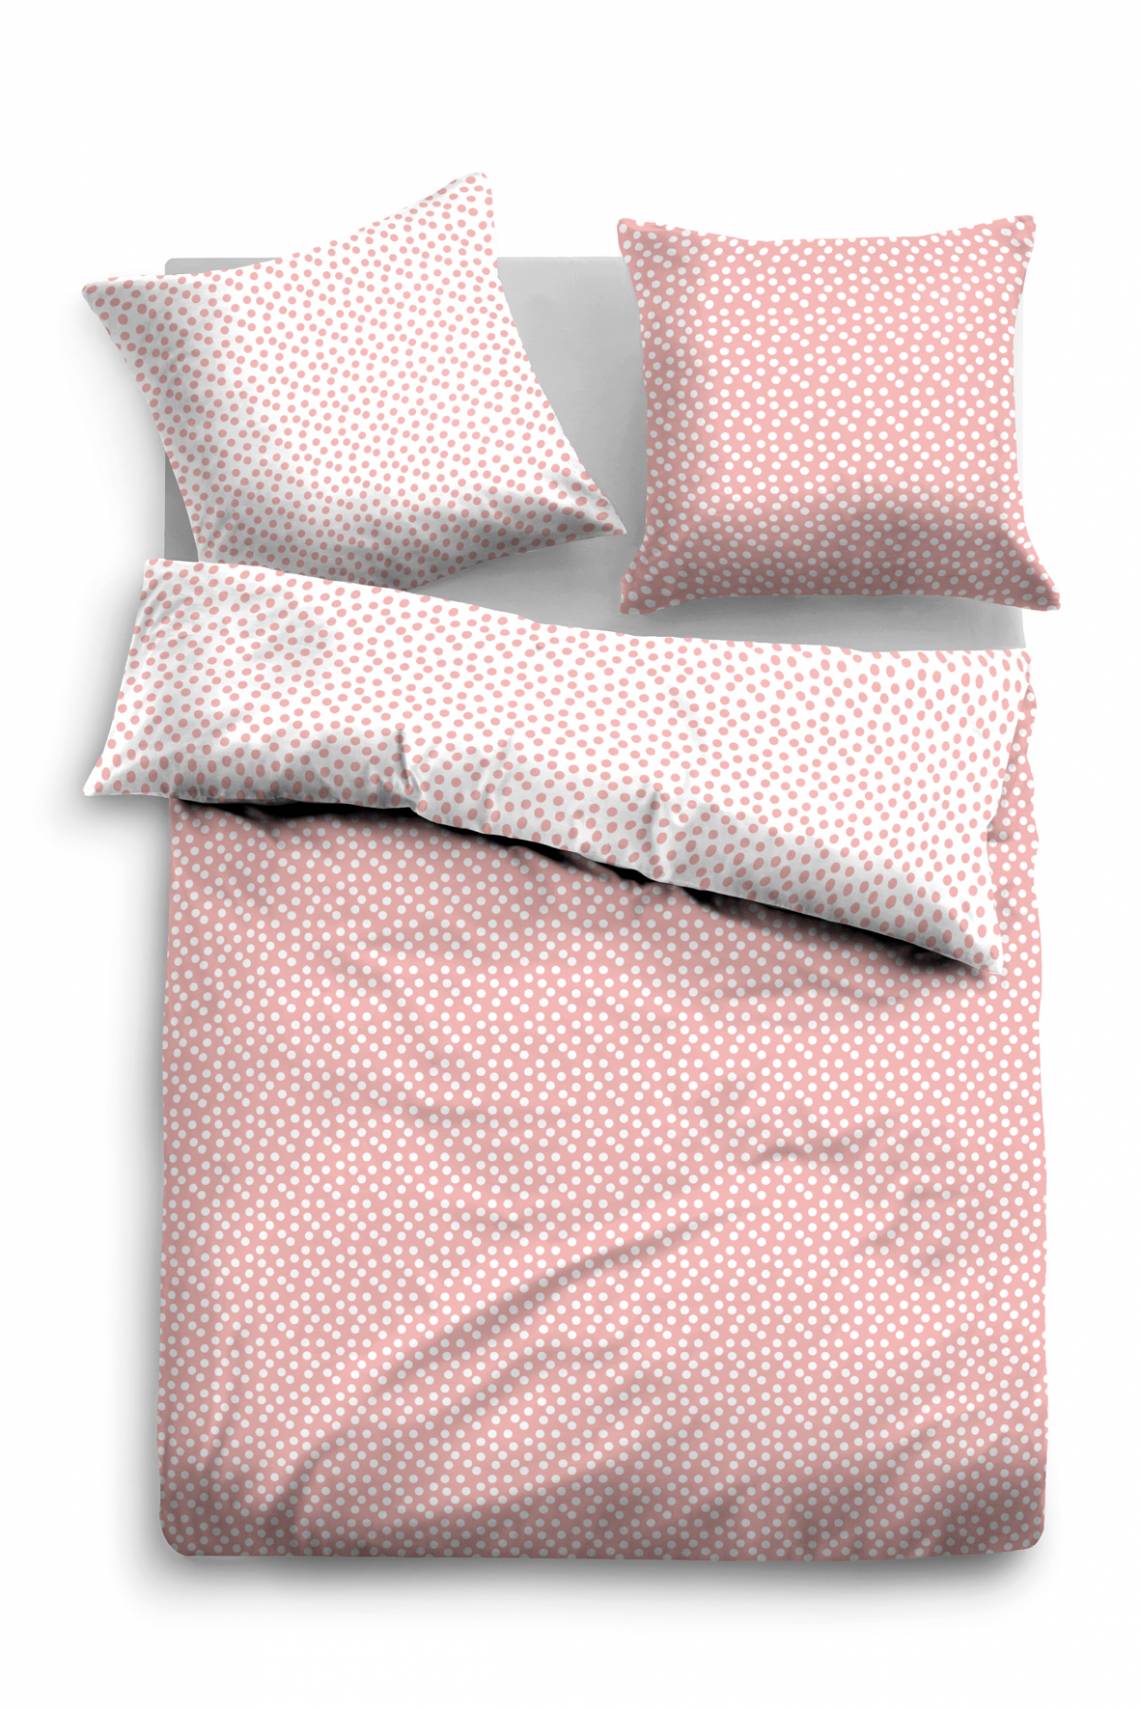 TOM TAILOR - Pure Pastels SATIN BED LINEN - 69903 / 841